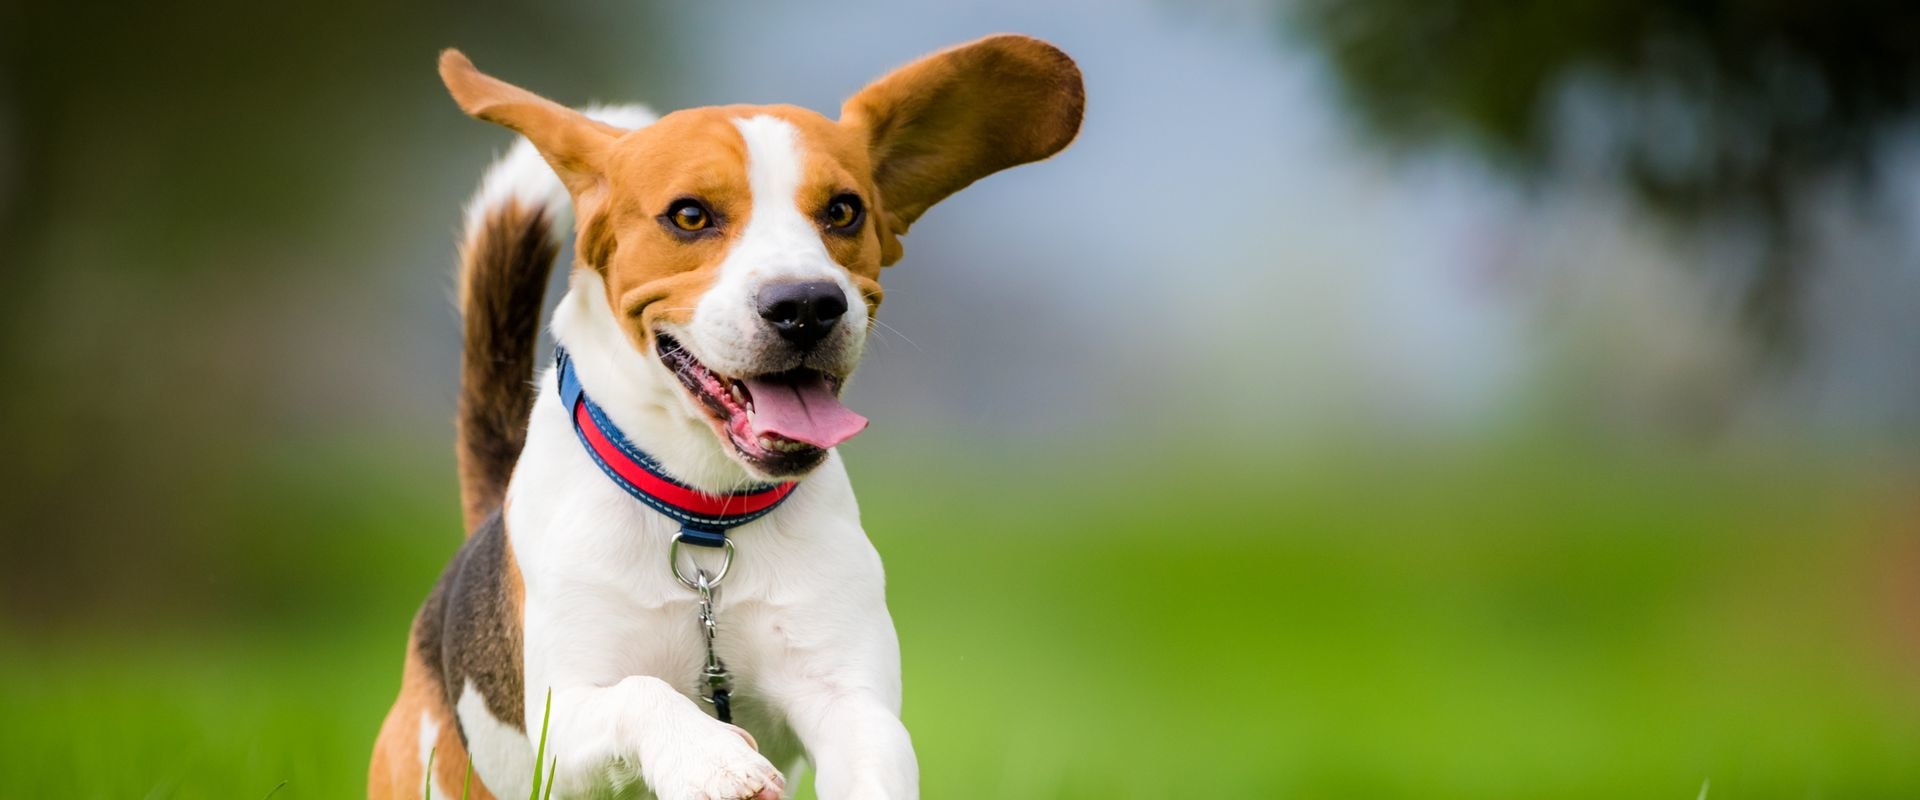 Which dog is the safest dog?